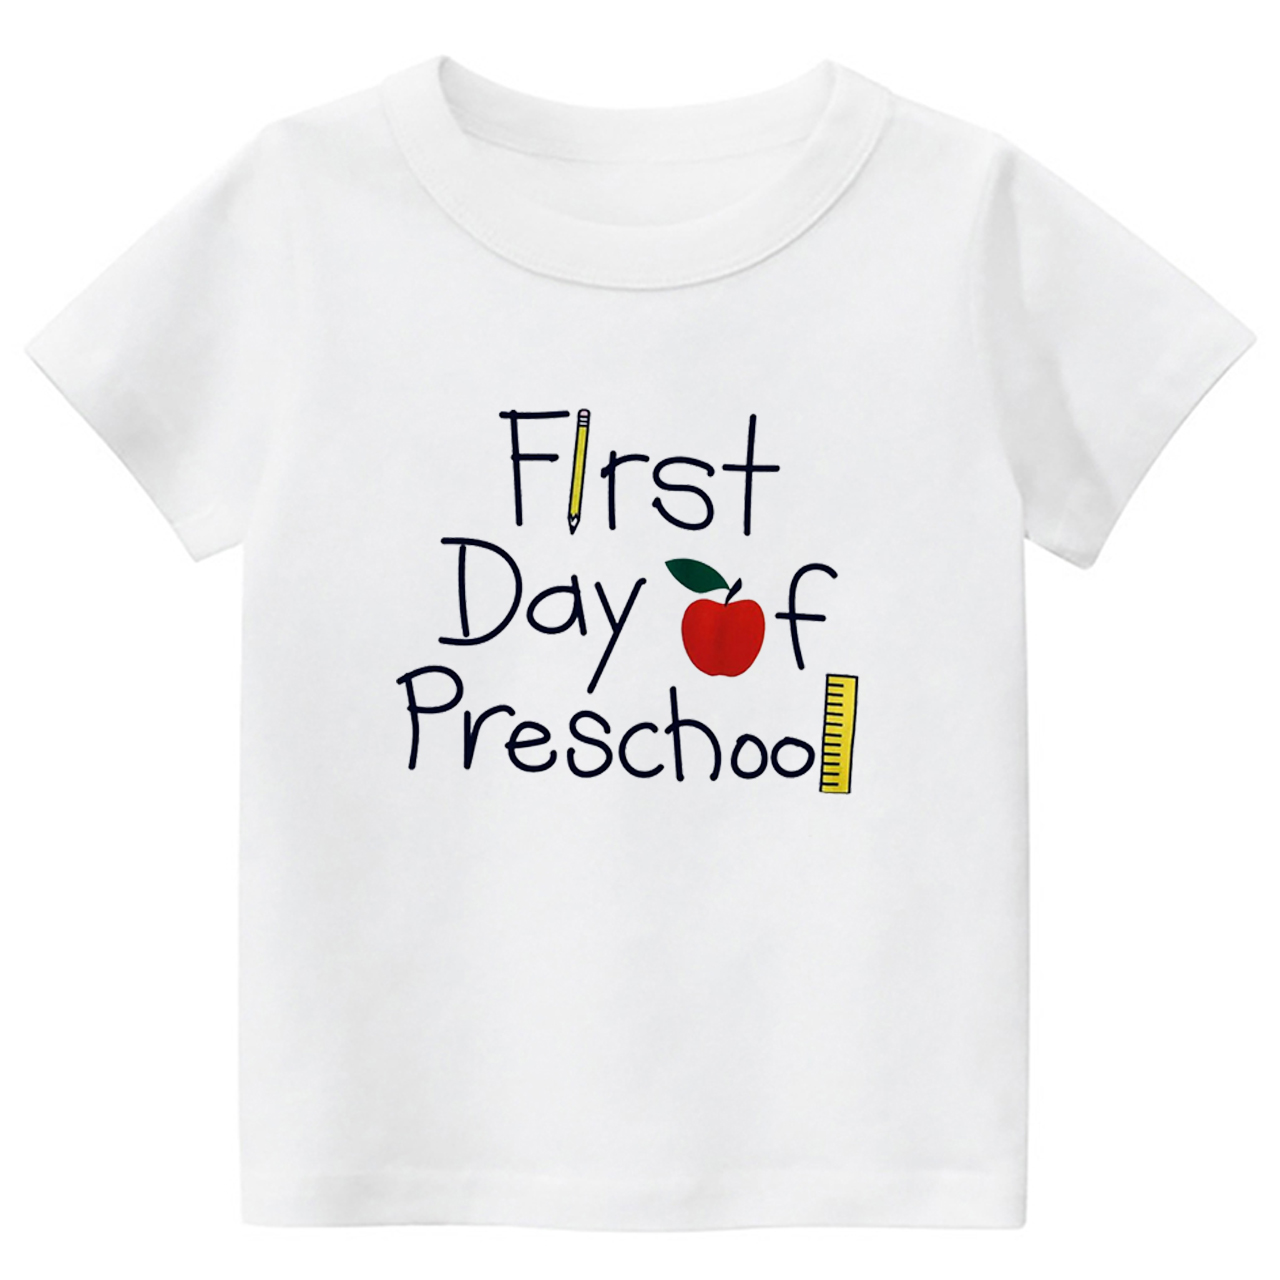 First Day of School Kids Shirts